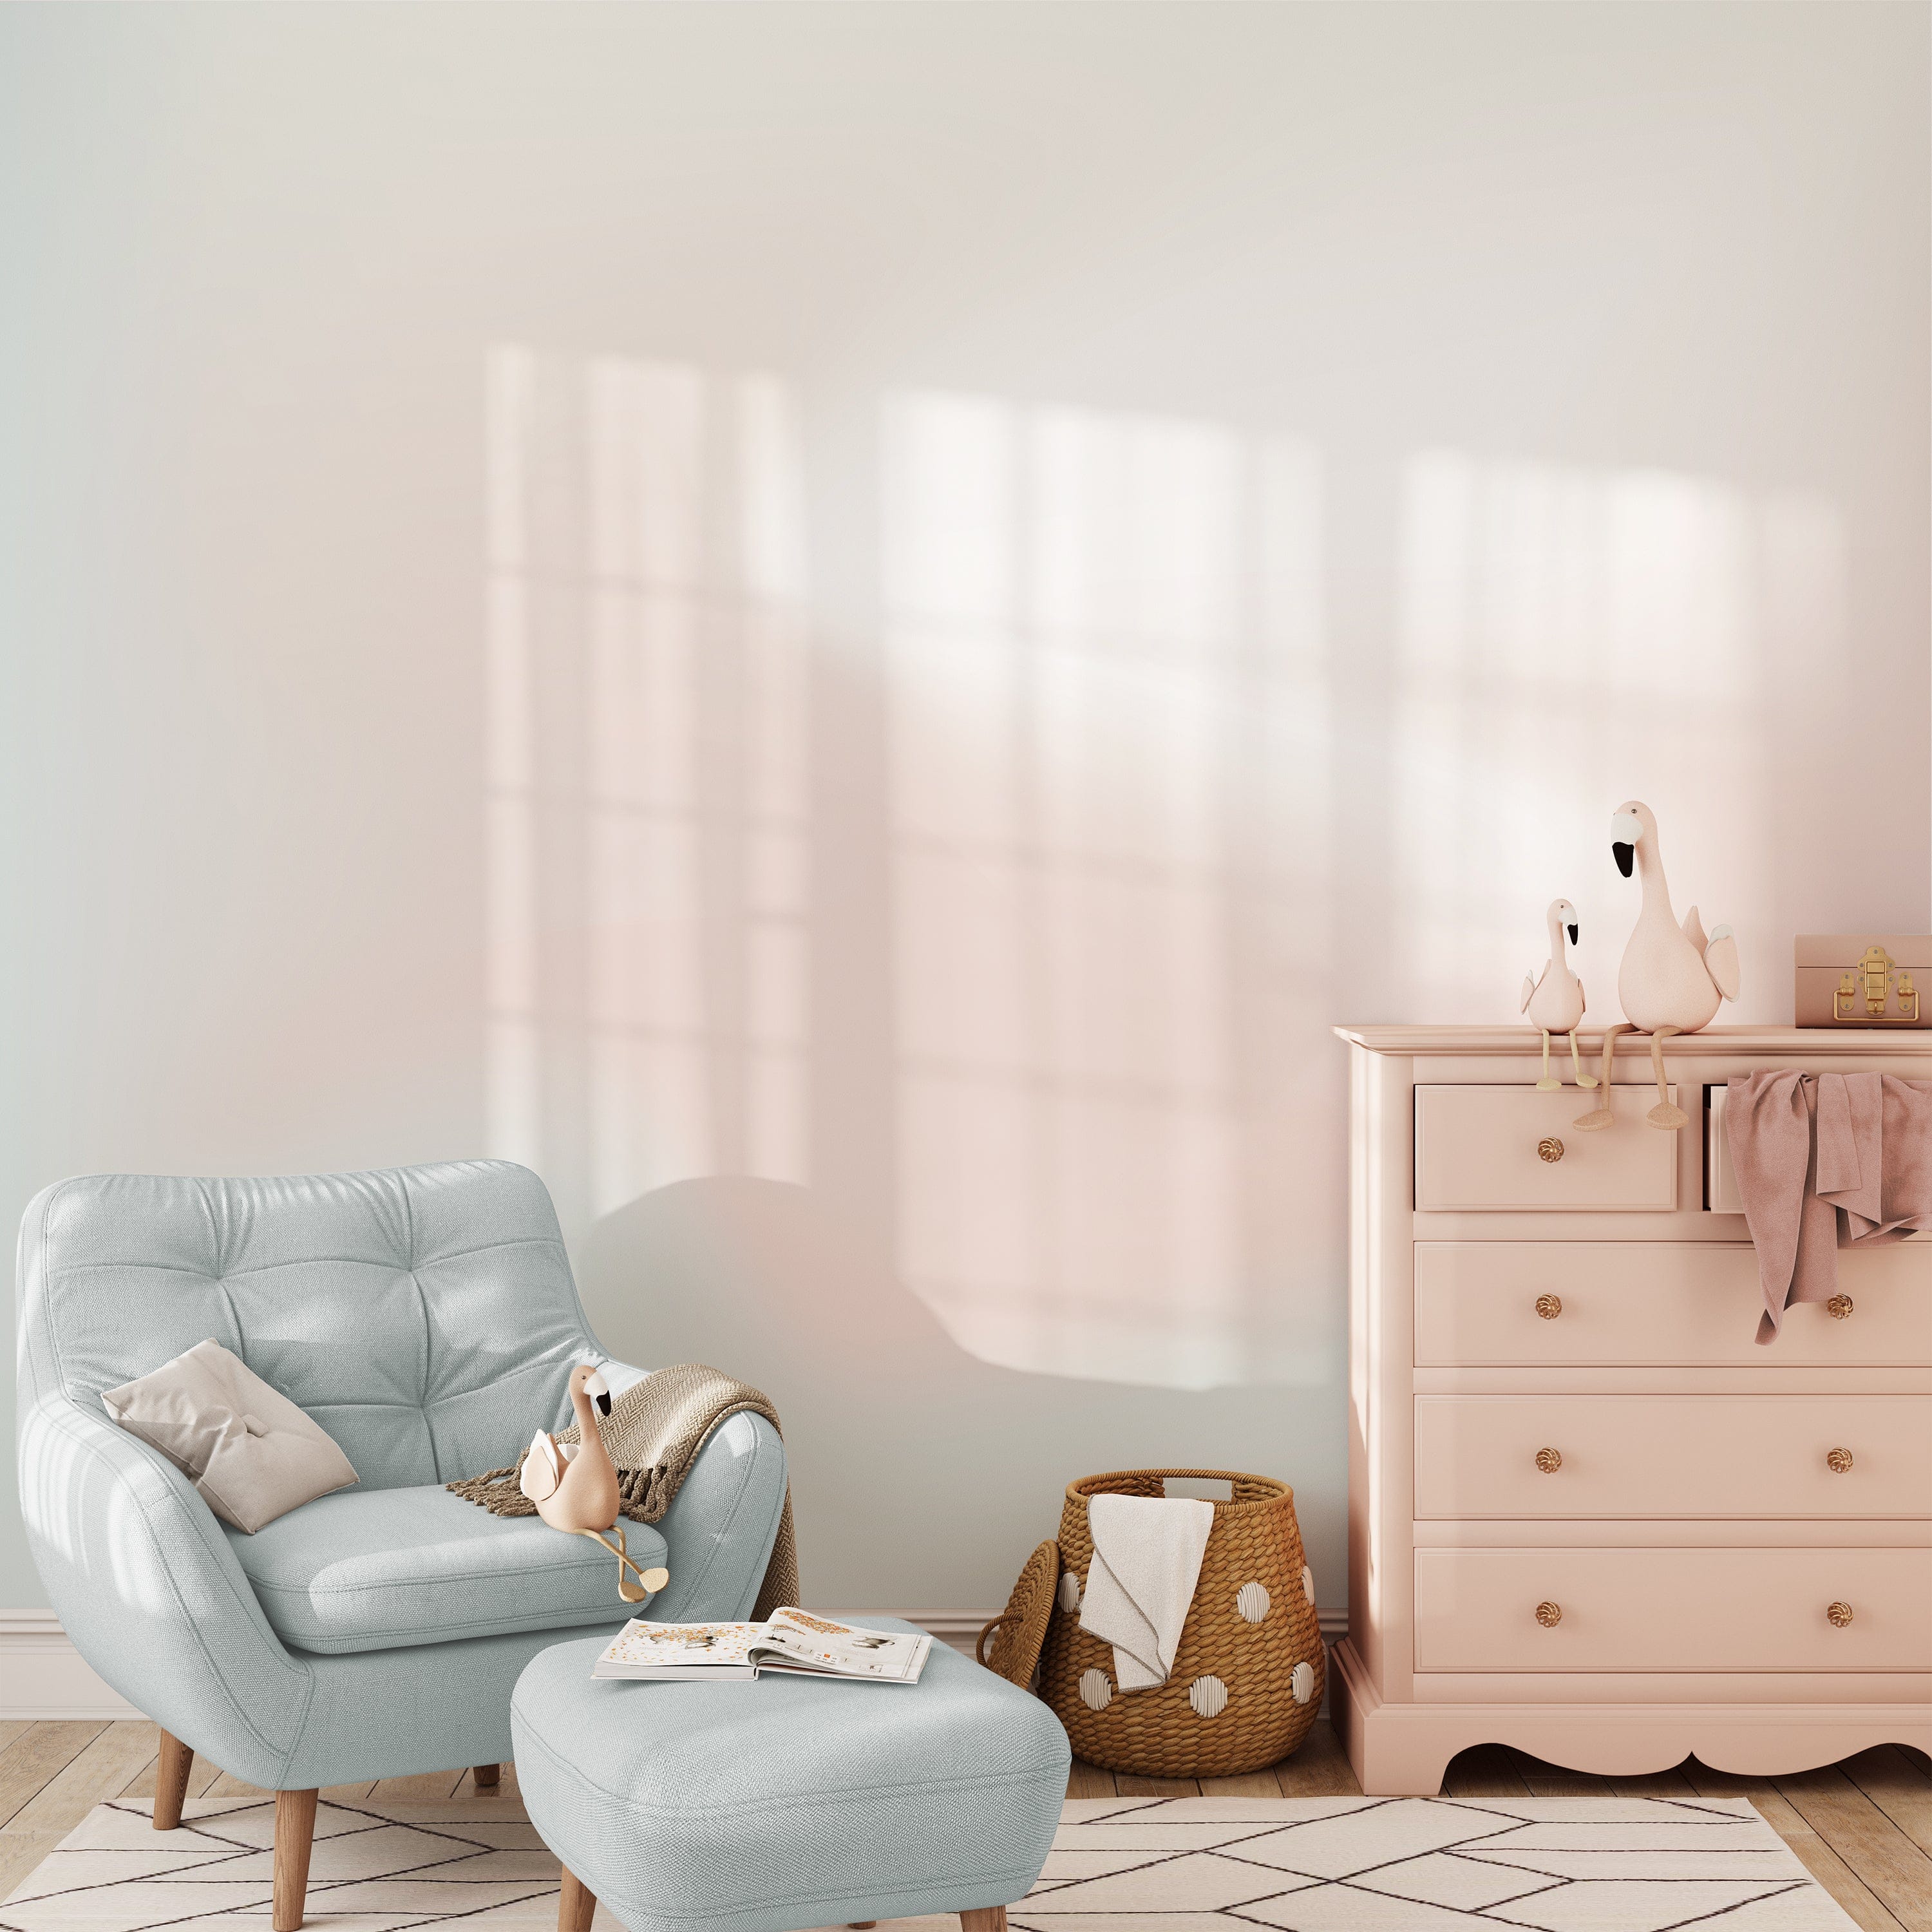 A cozy nursery setup featuring the Soft Gradient wallpaper mural, with a comfortable armchair, ottoman, and pastel-colored dresser.